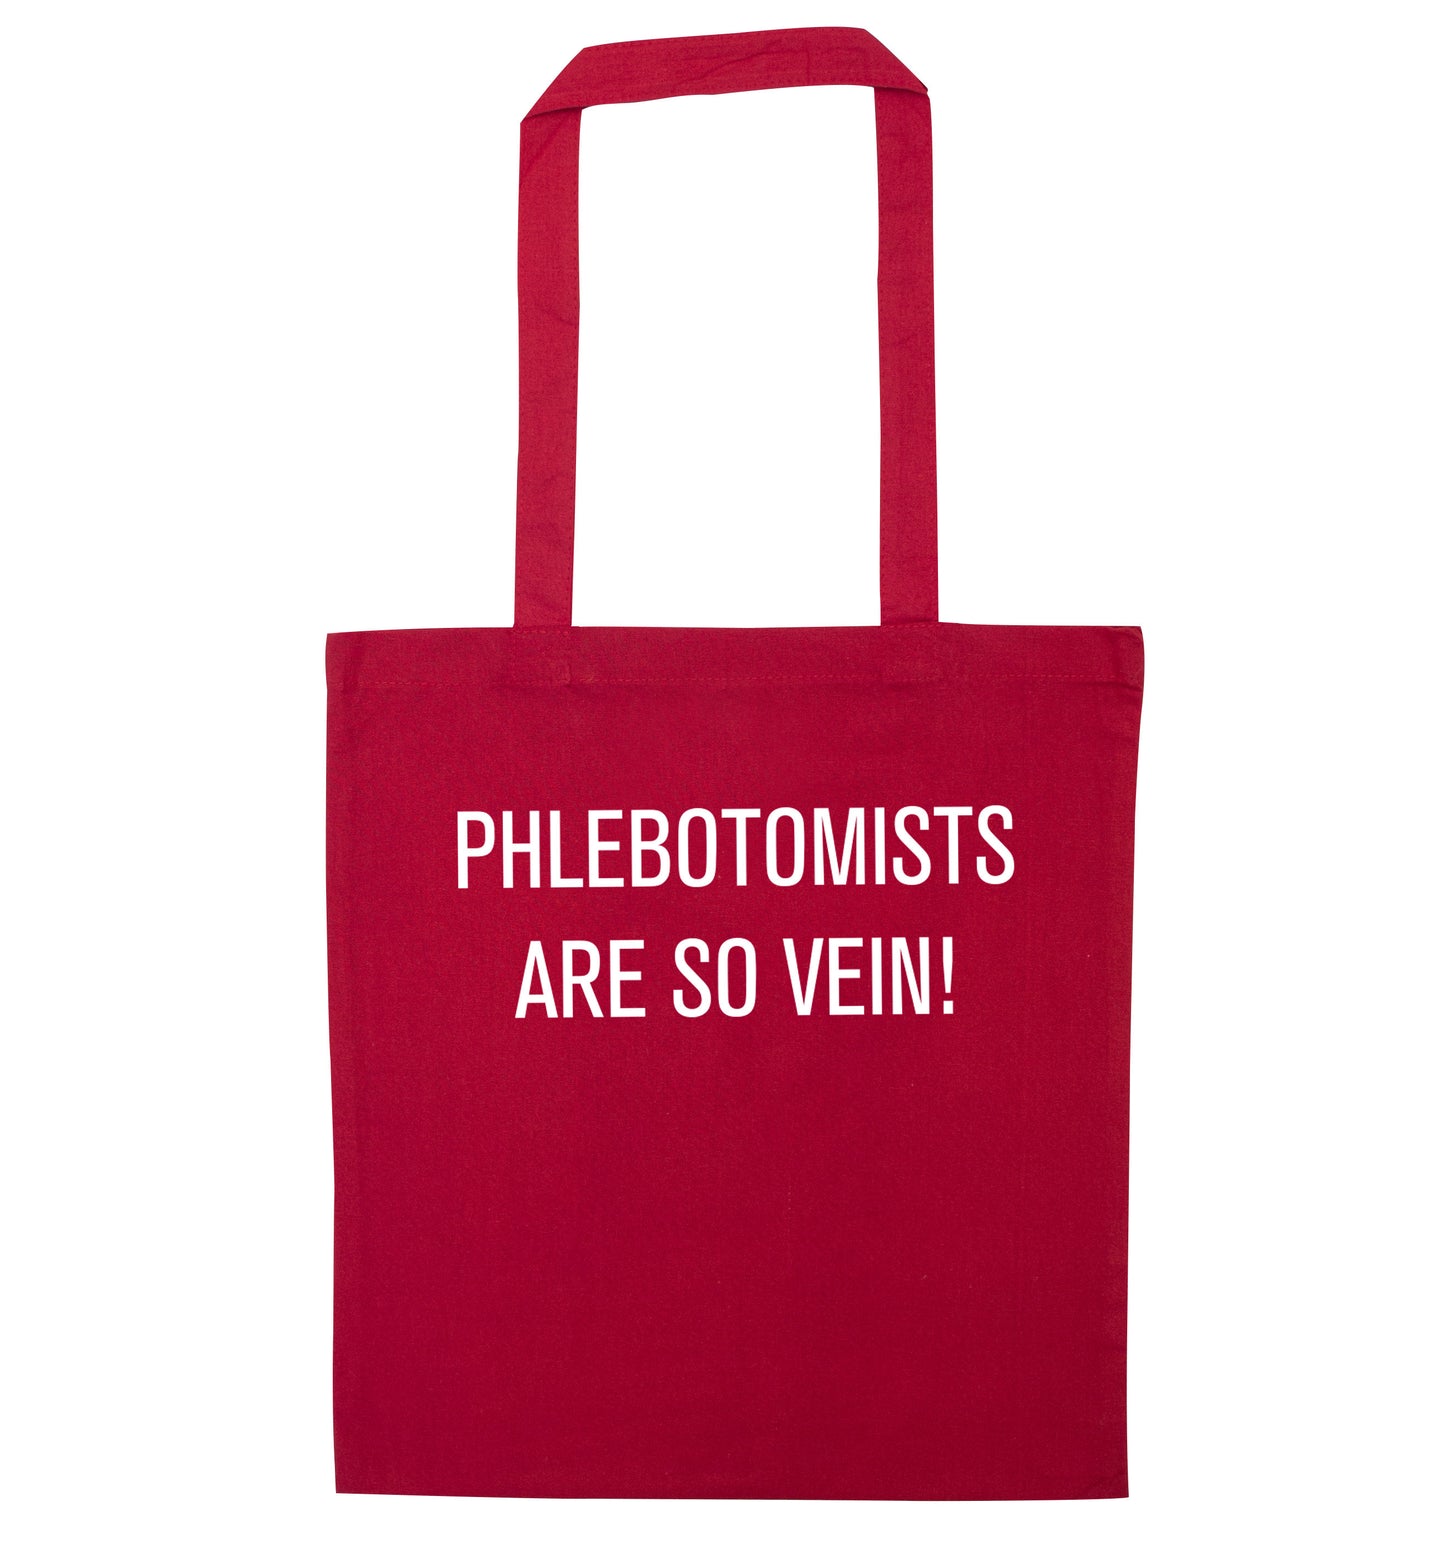 Phlebotomists are so vein! red tote bag